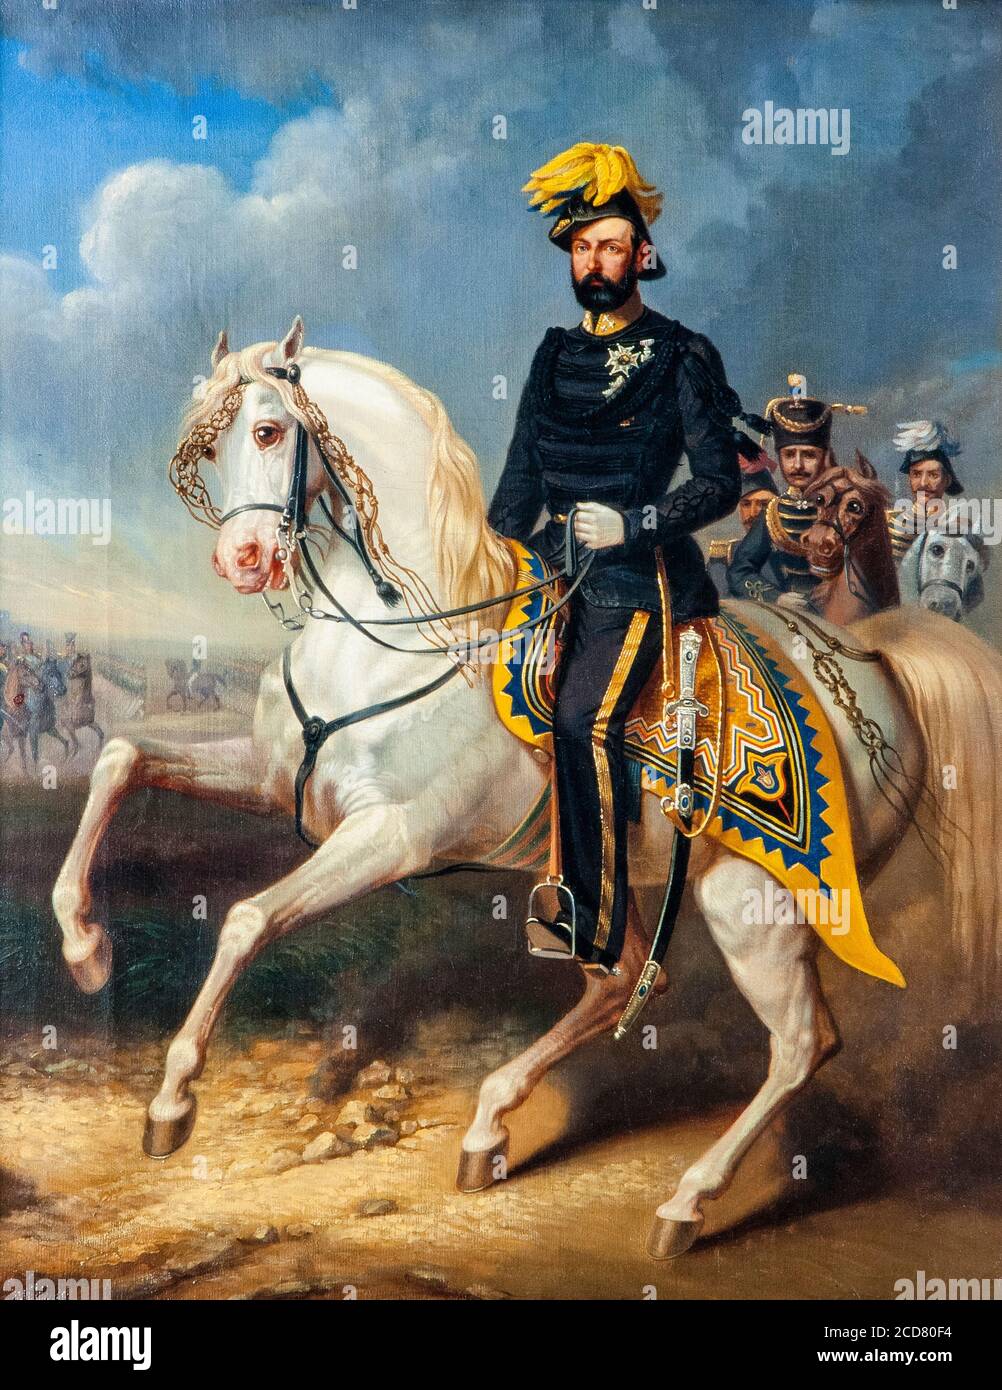 Charles XV (1826-1872), King of Sweden and Norway, equestrian portrait by Carl Fredrik Kiörboe, circa 1860 Stock Photo